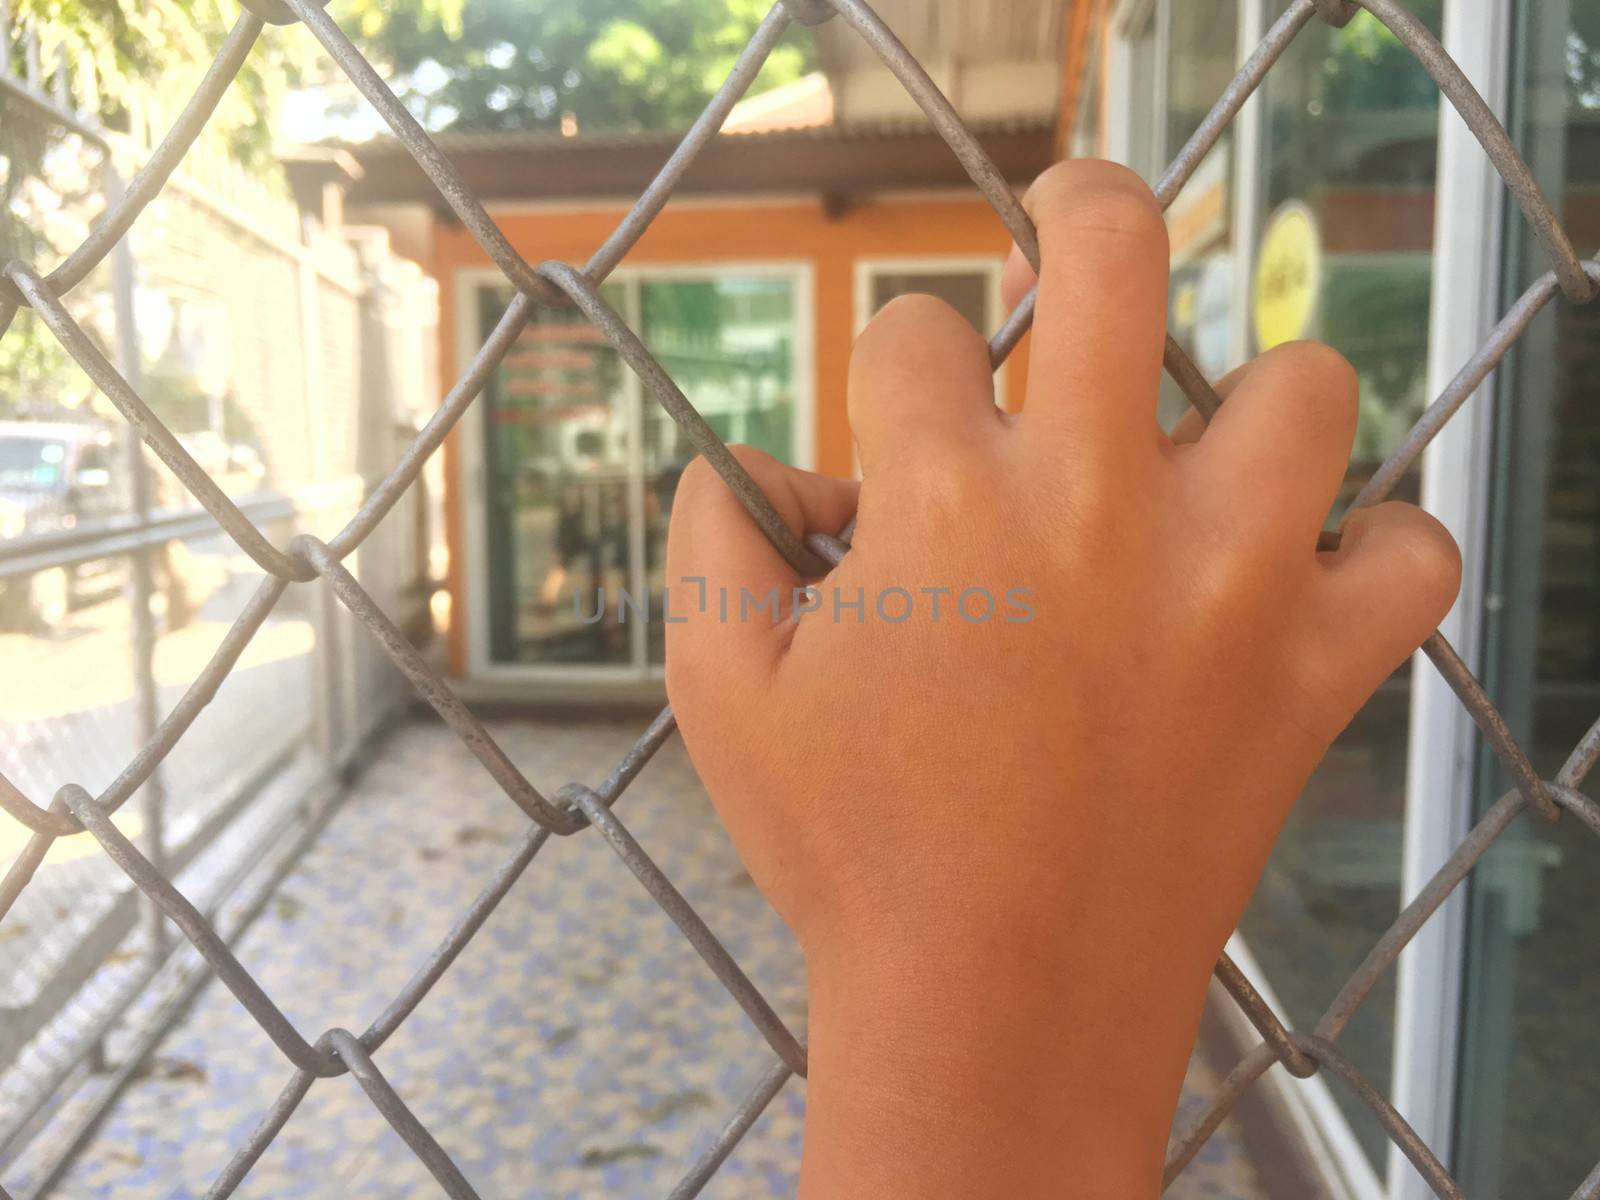 Children's hand with grille. by e22xua